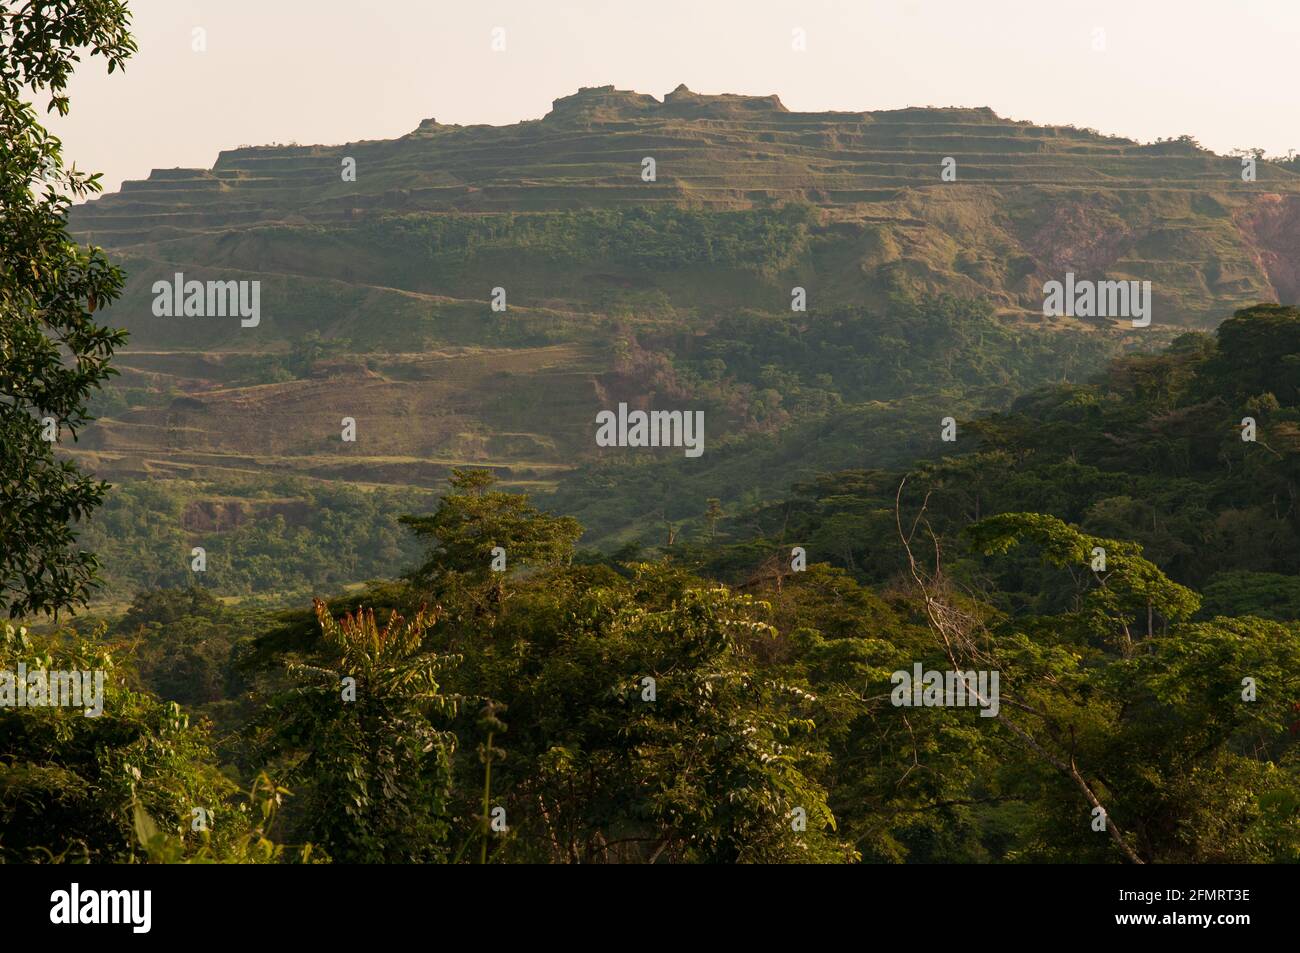 Edge of Sapo National Park showing mining just beyond its boundary - threatening to encroach on this protected area and damage its wildlife. Stock Photo